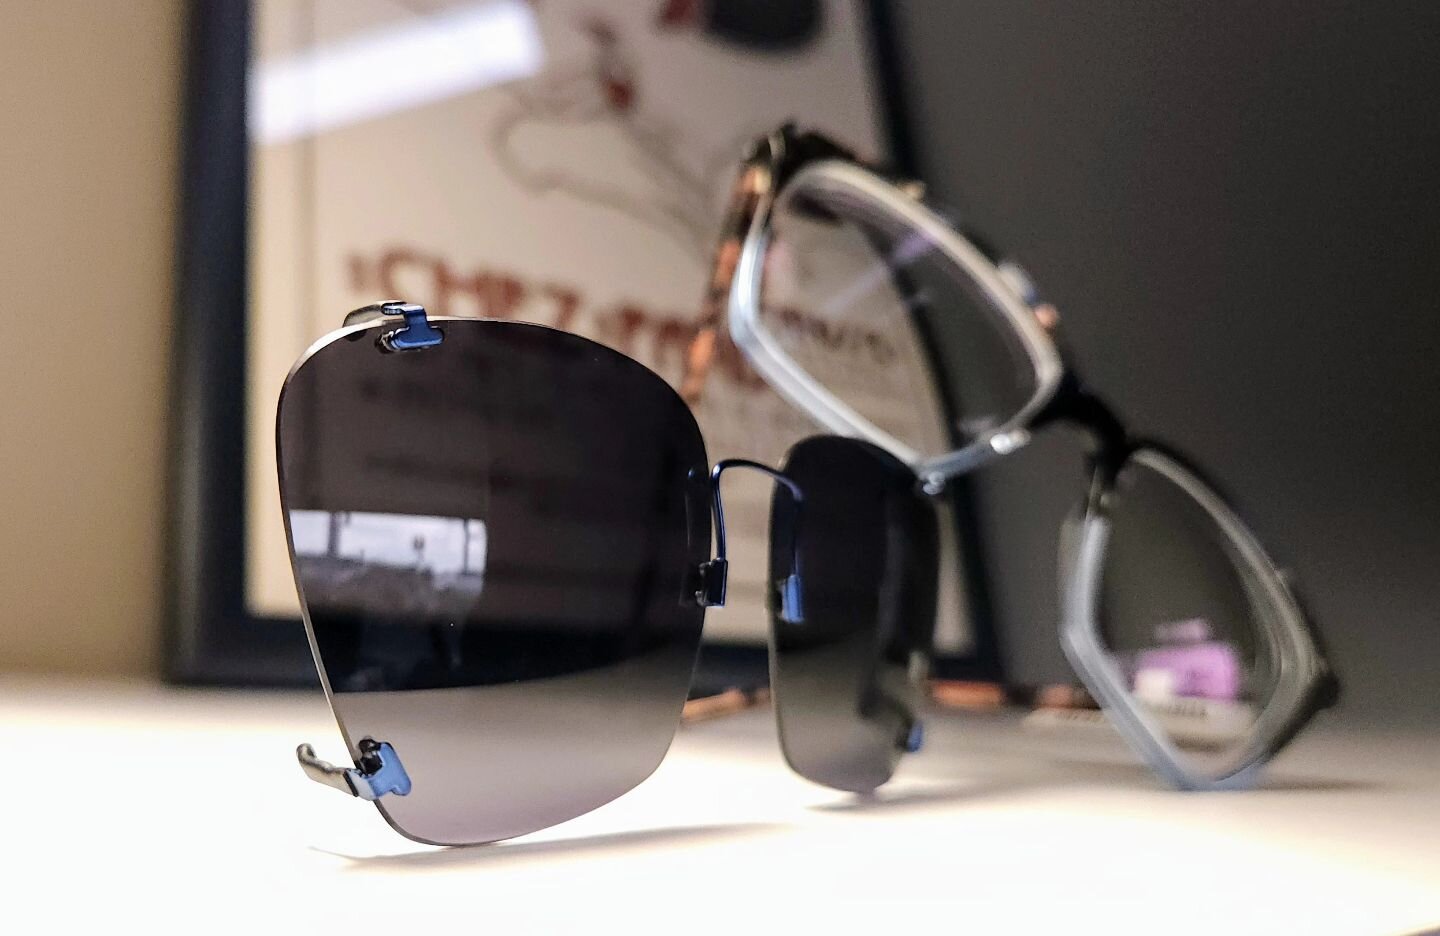 Our clip of the week goes to this Polarized Grey Illusion Clip in Blue. The blue perfectly matches this LaFont frame! 💙

#clipoftheweek #eclips #polarizedclipon #polarized #clipon #cliponforanyframe #lafont #bayarea #smallbusiness #orderonline #orde